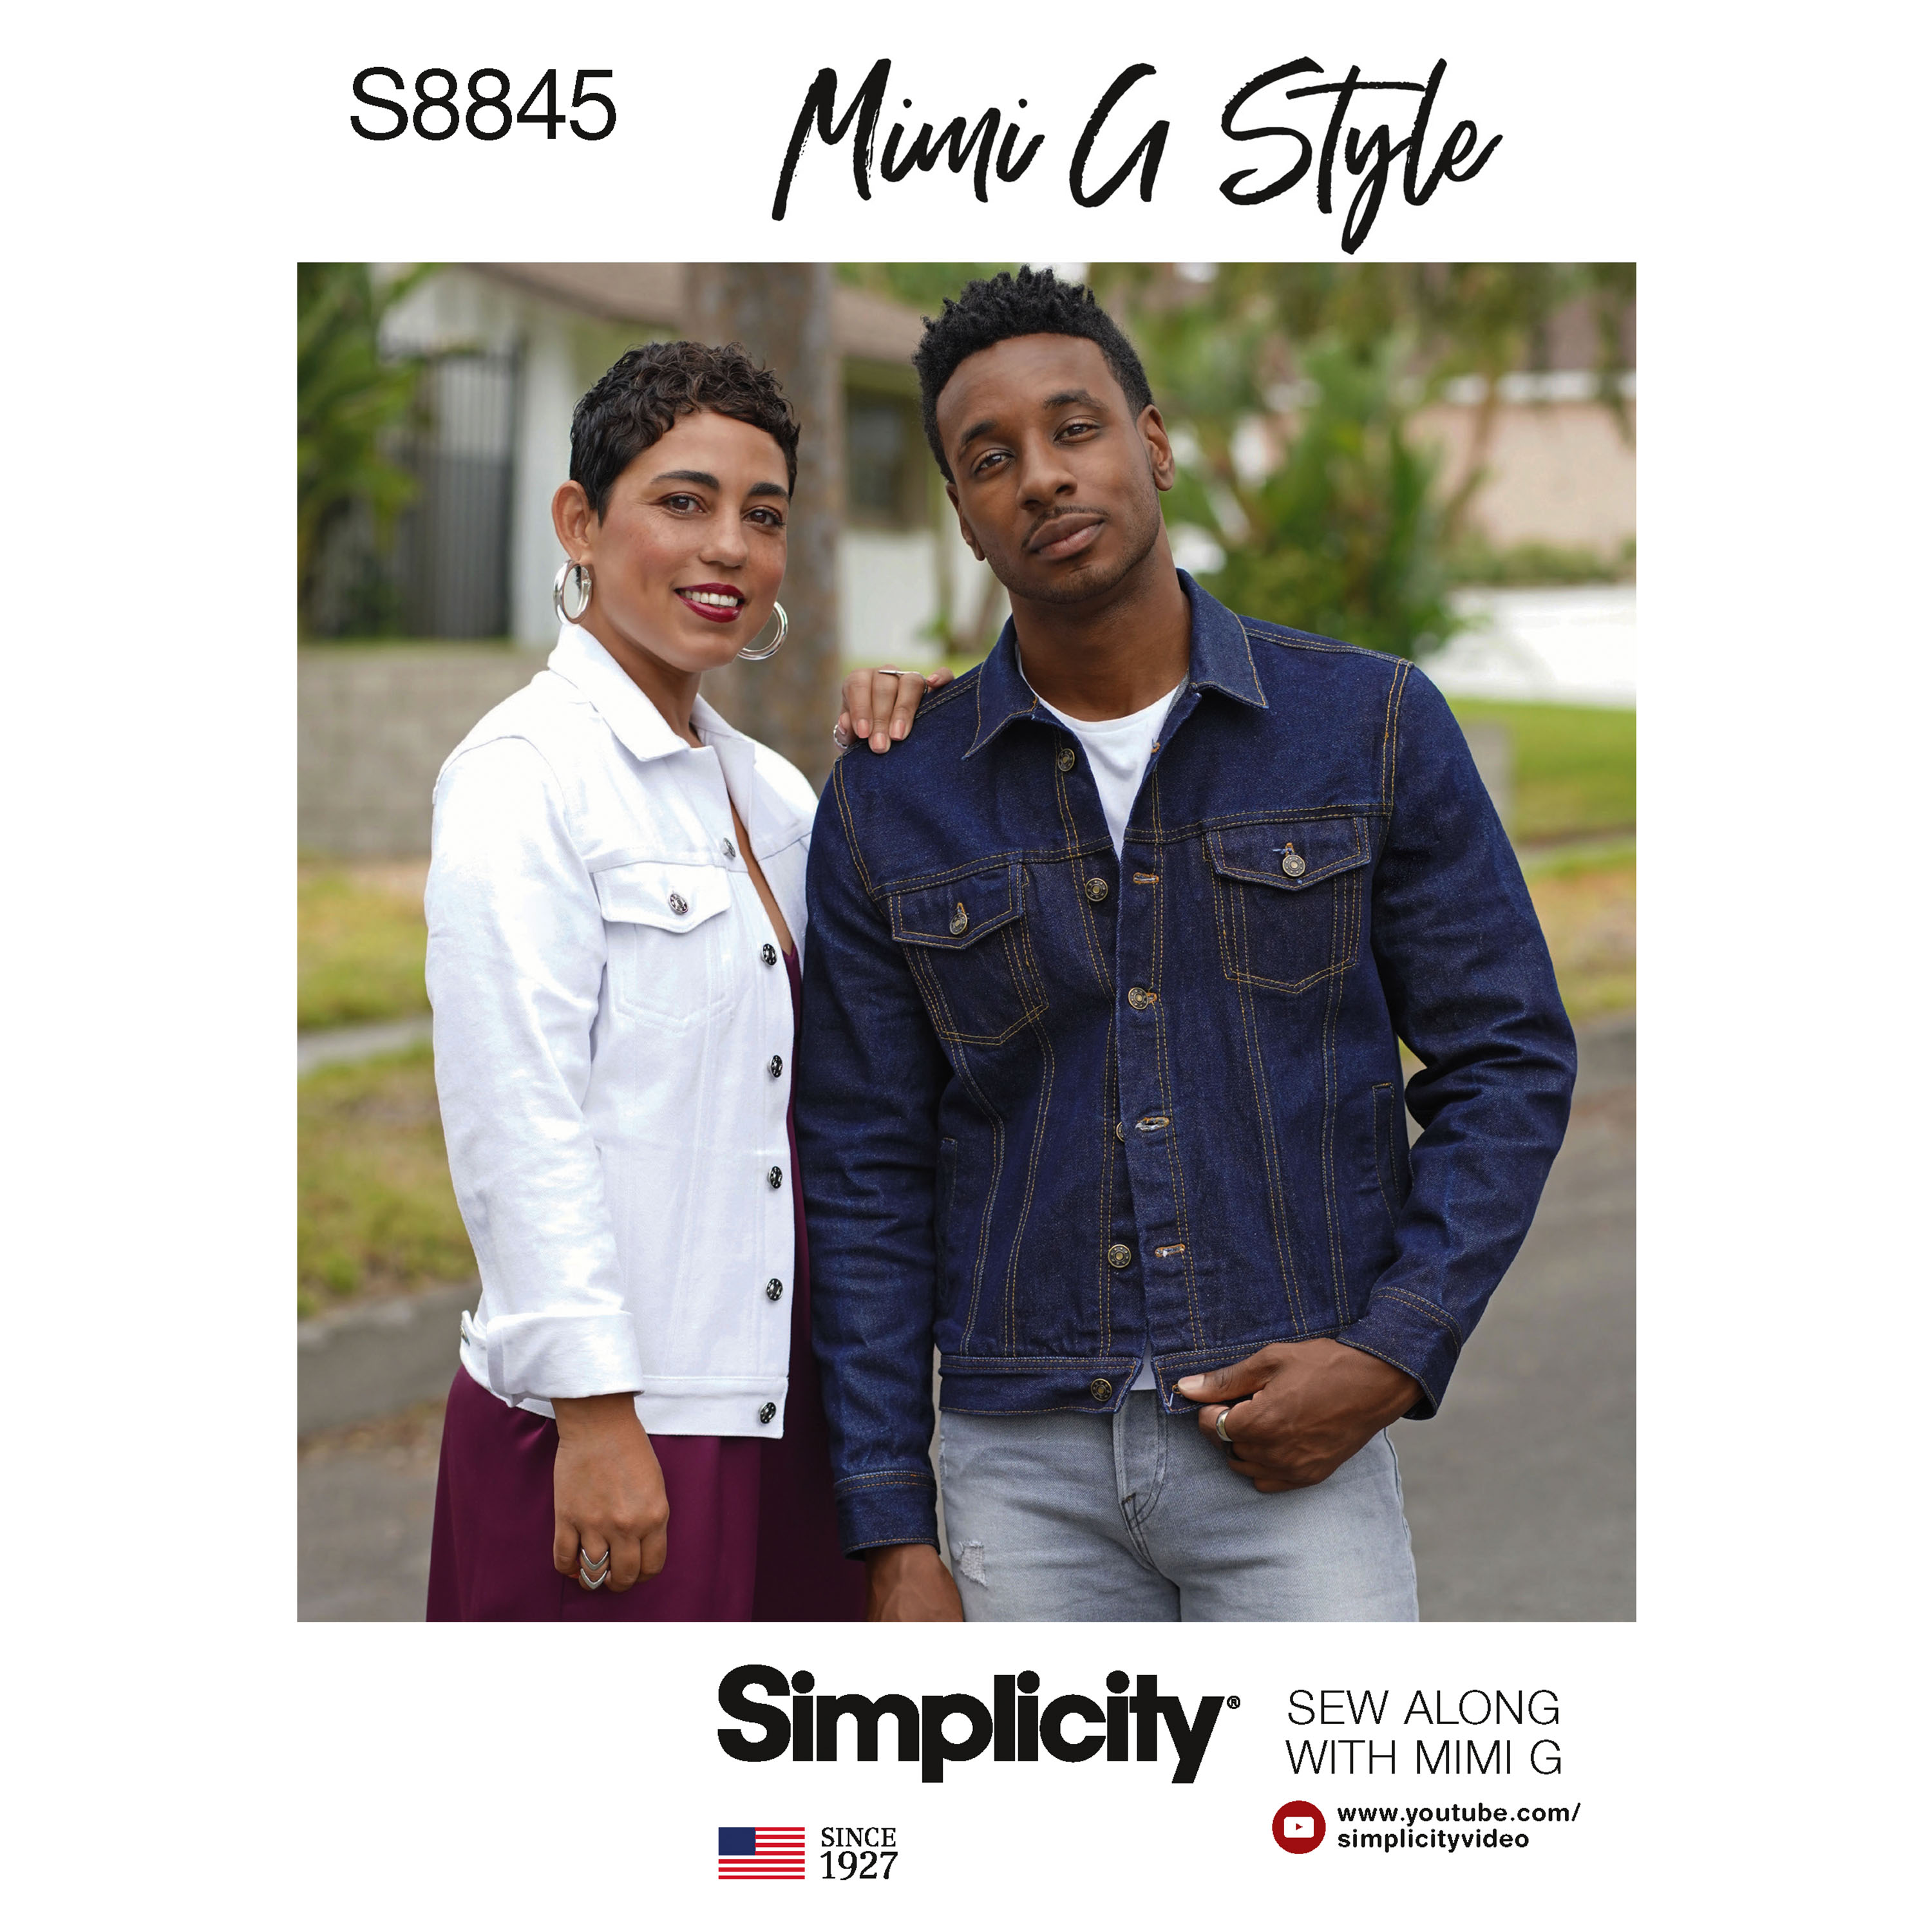 https://images.patternreview.com/sewing/patterns/simplicity/2018/8845/8845.jpg